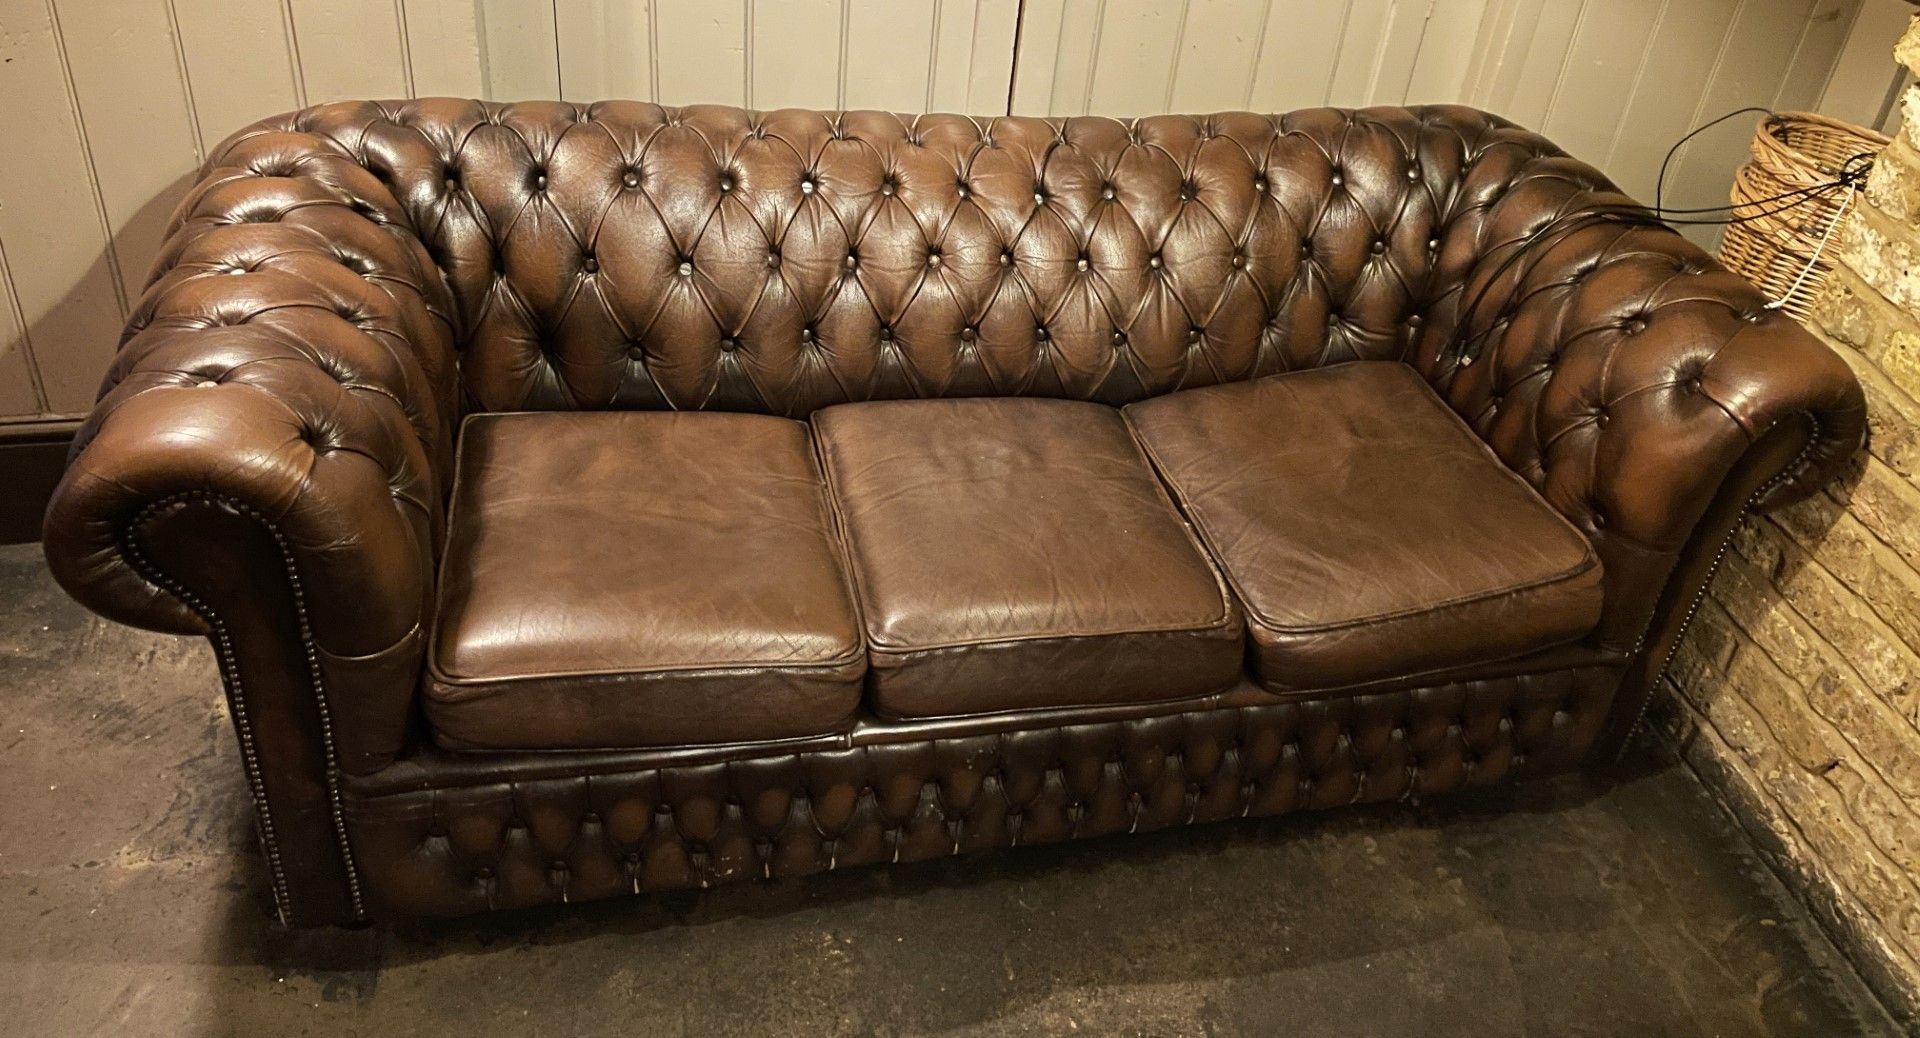 1 x Vintage Premium Handmade Brown Leather Button-back Chesterfield 3-Seater Studded Sofa